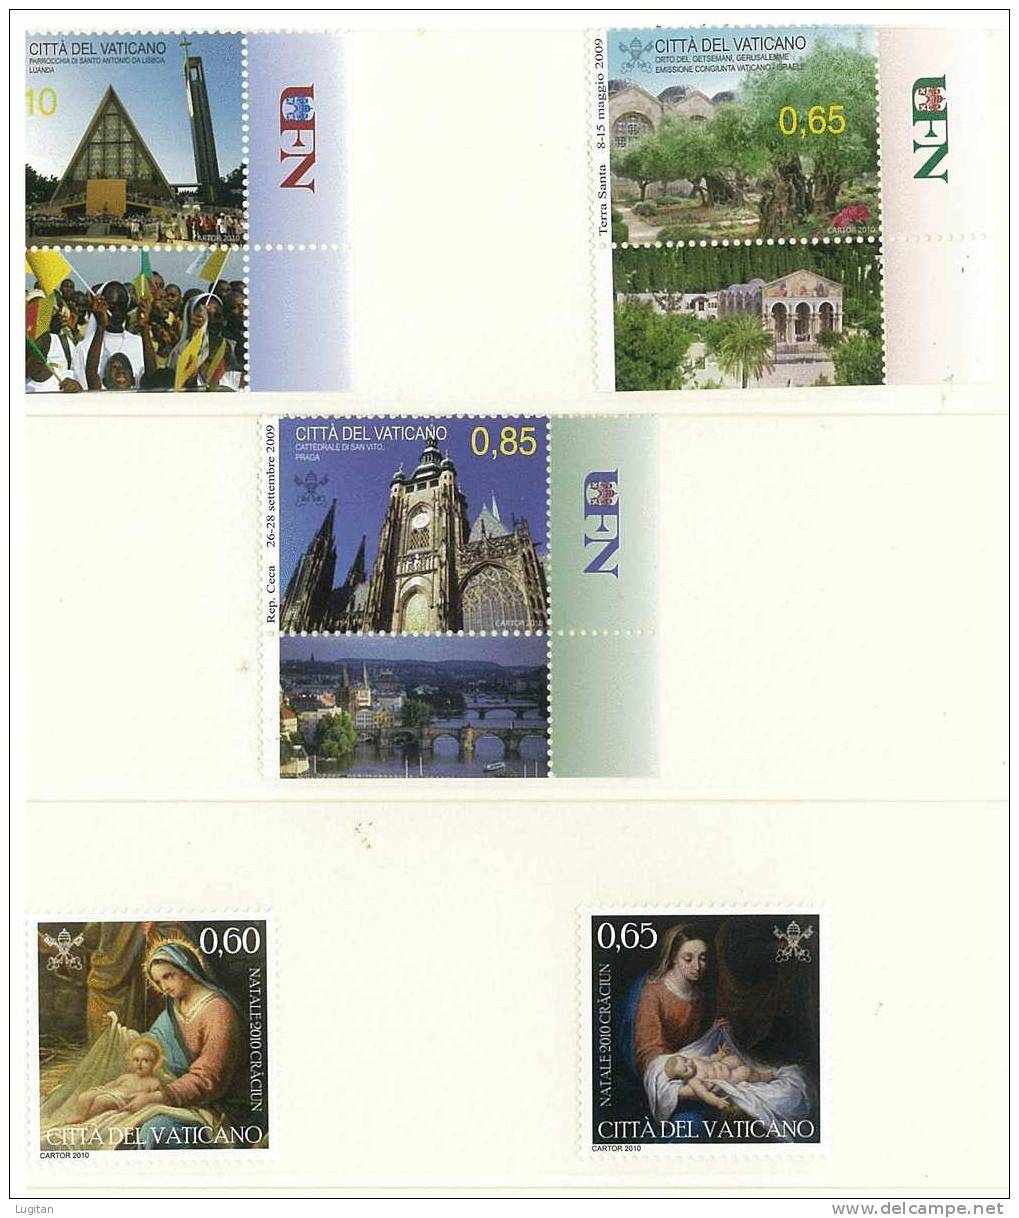 Philately - VATICAN CITY 2010 - SEE DETAILS - CHRISTMAS - FRANCISCAN RULE - Tolstoy - Chekhov - APOSTOLIC JOURNEYS - Unused Stamps